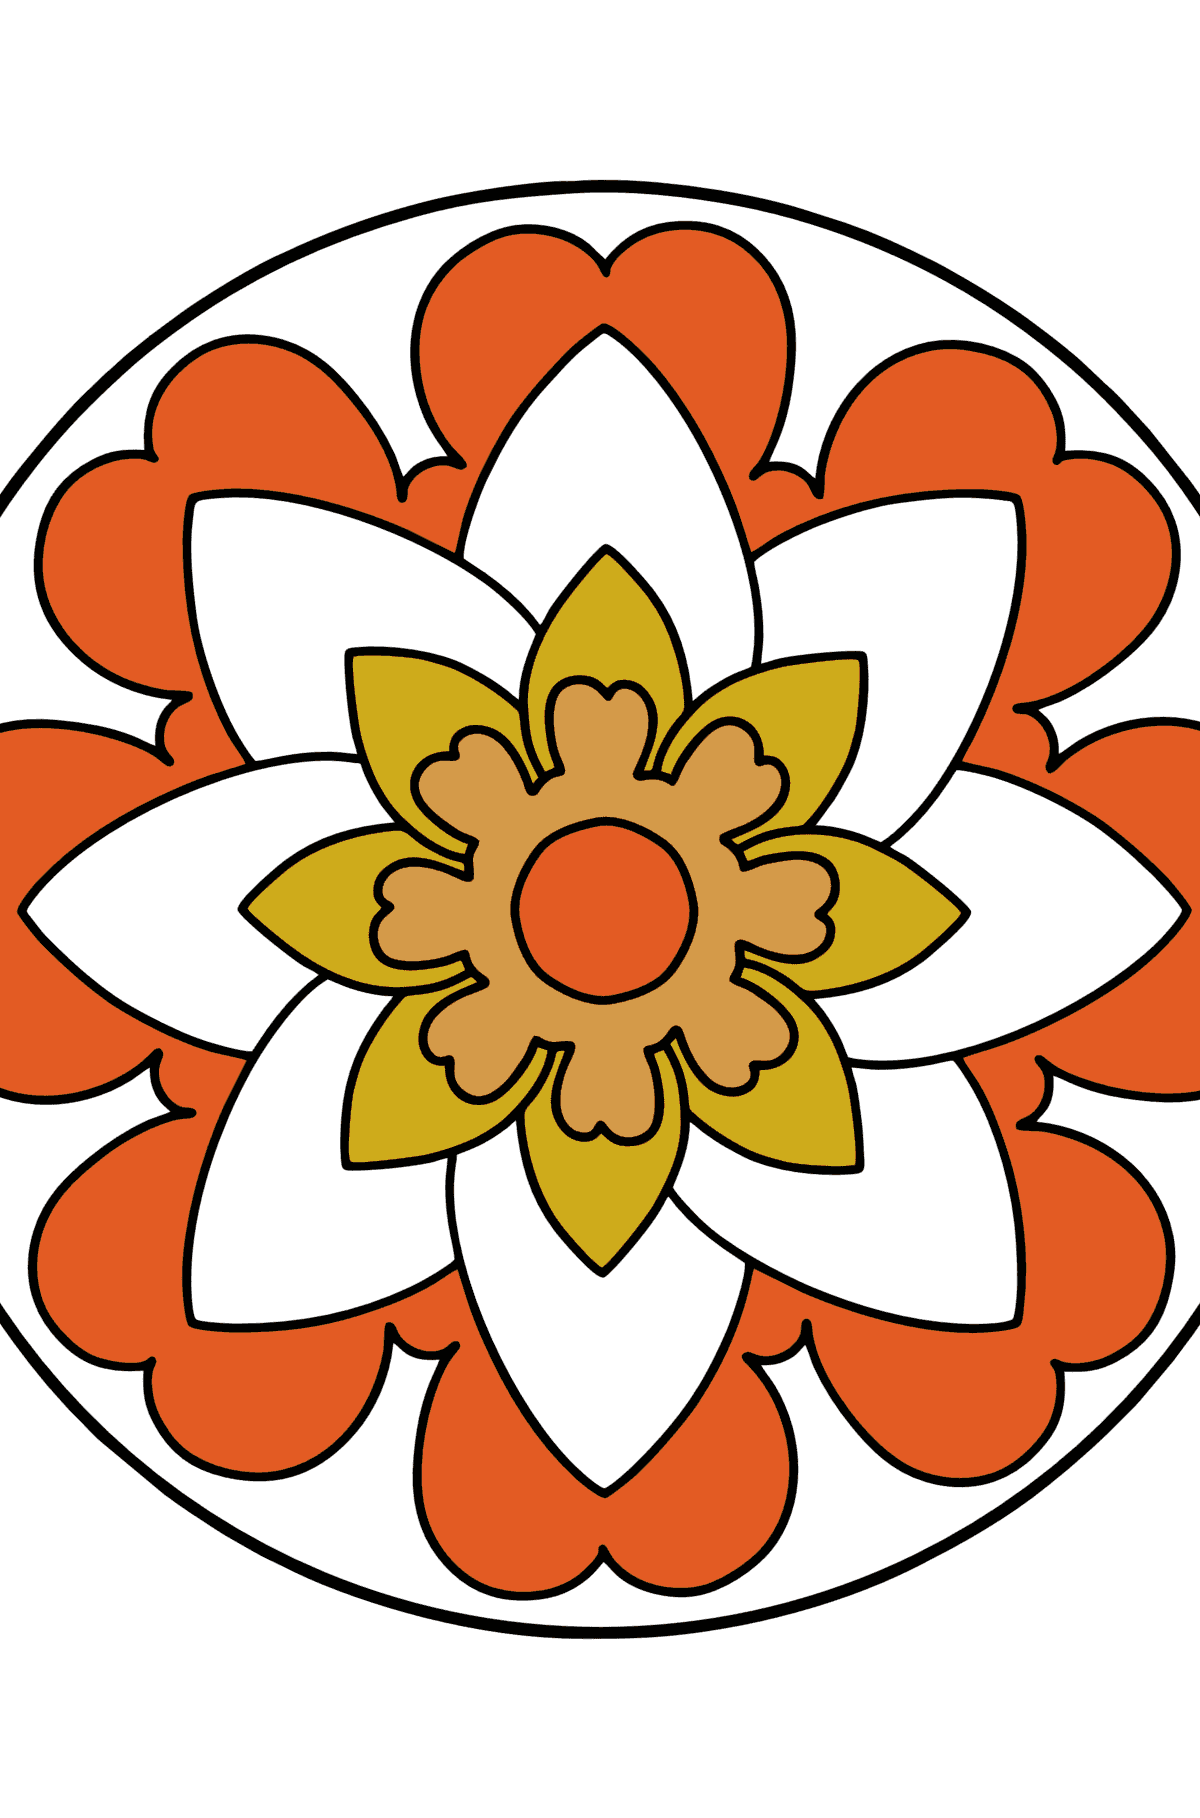 Mandala coloring page - 20 elements - Coloring Pages for Kids